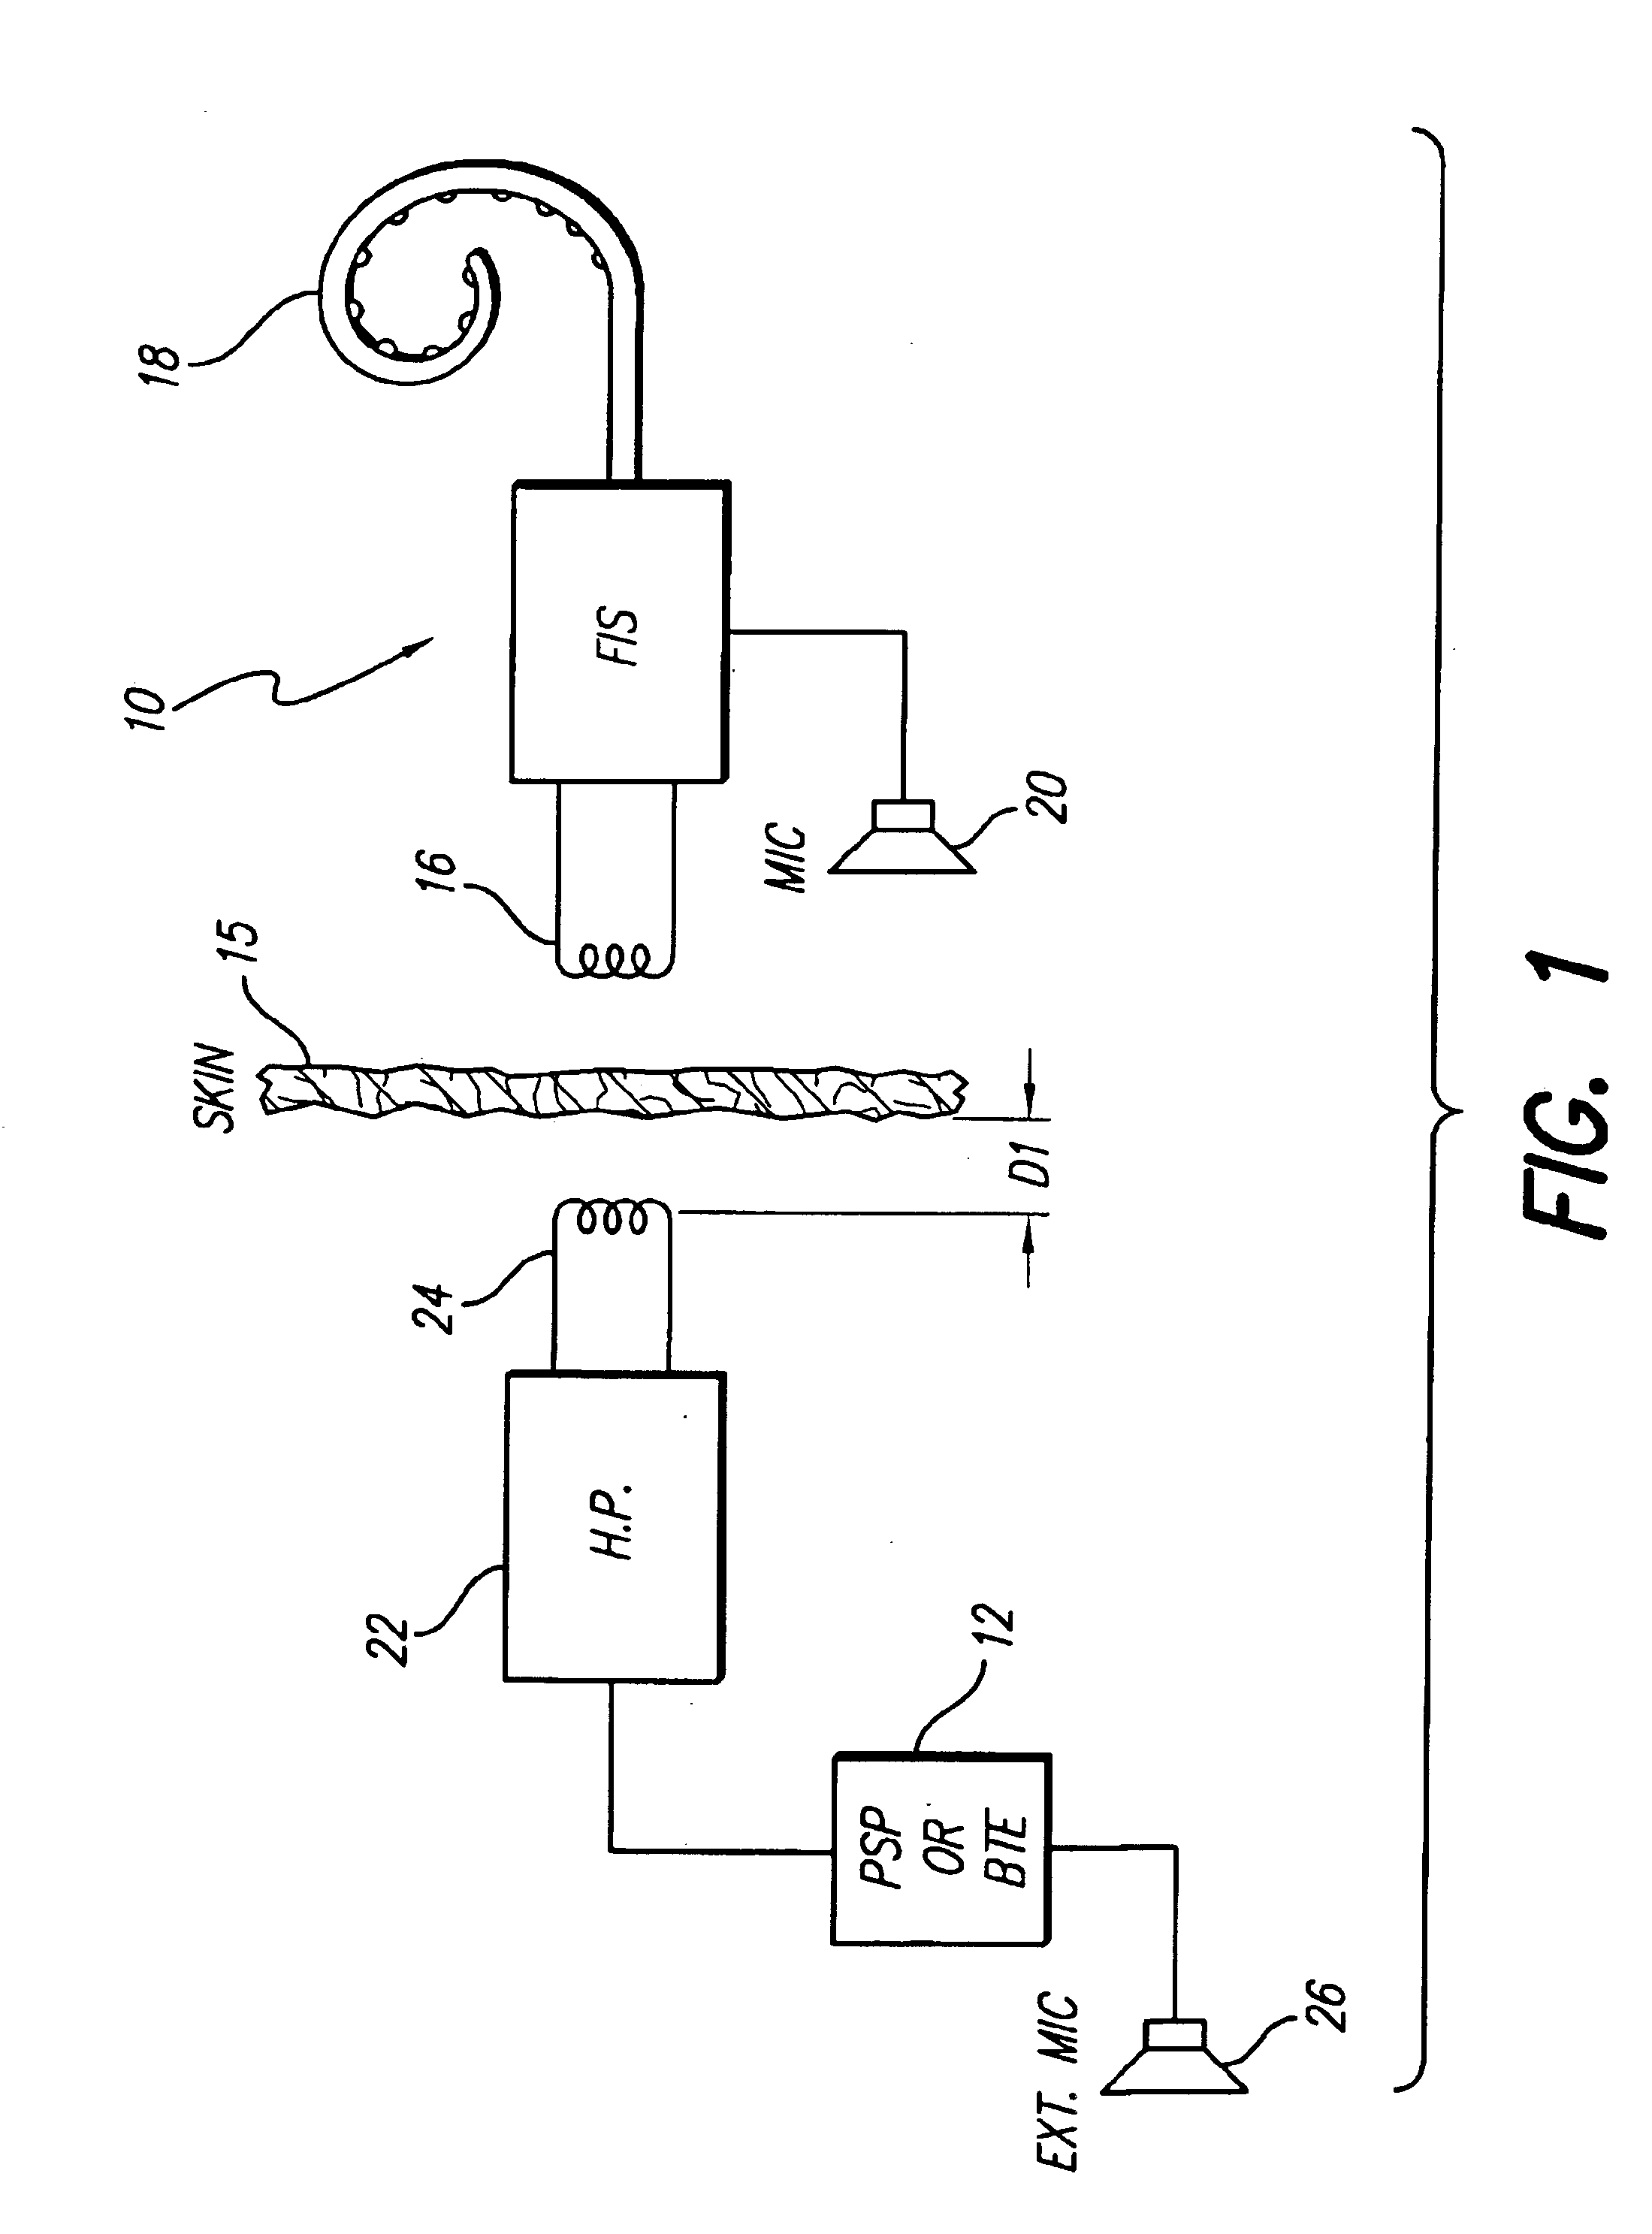 Implantable neural stimulator system including remote control unit for use therewith